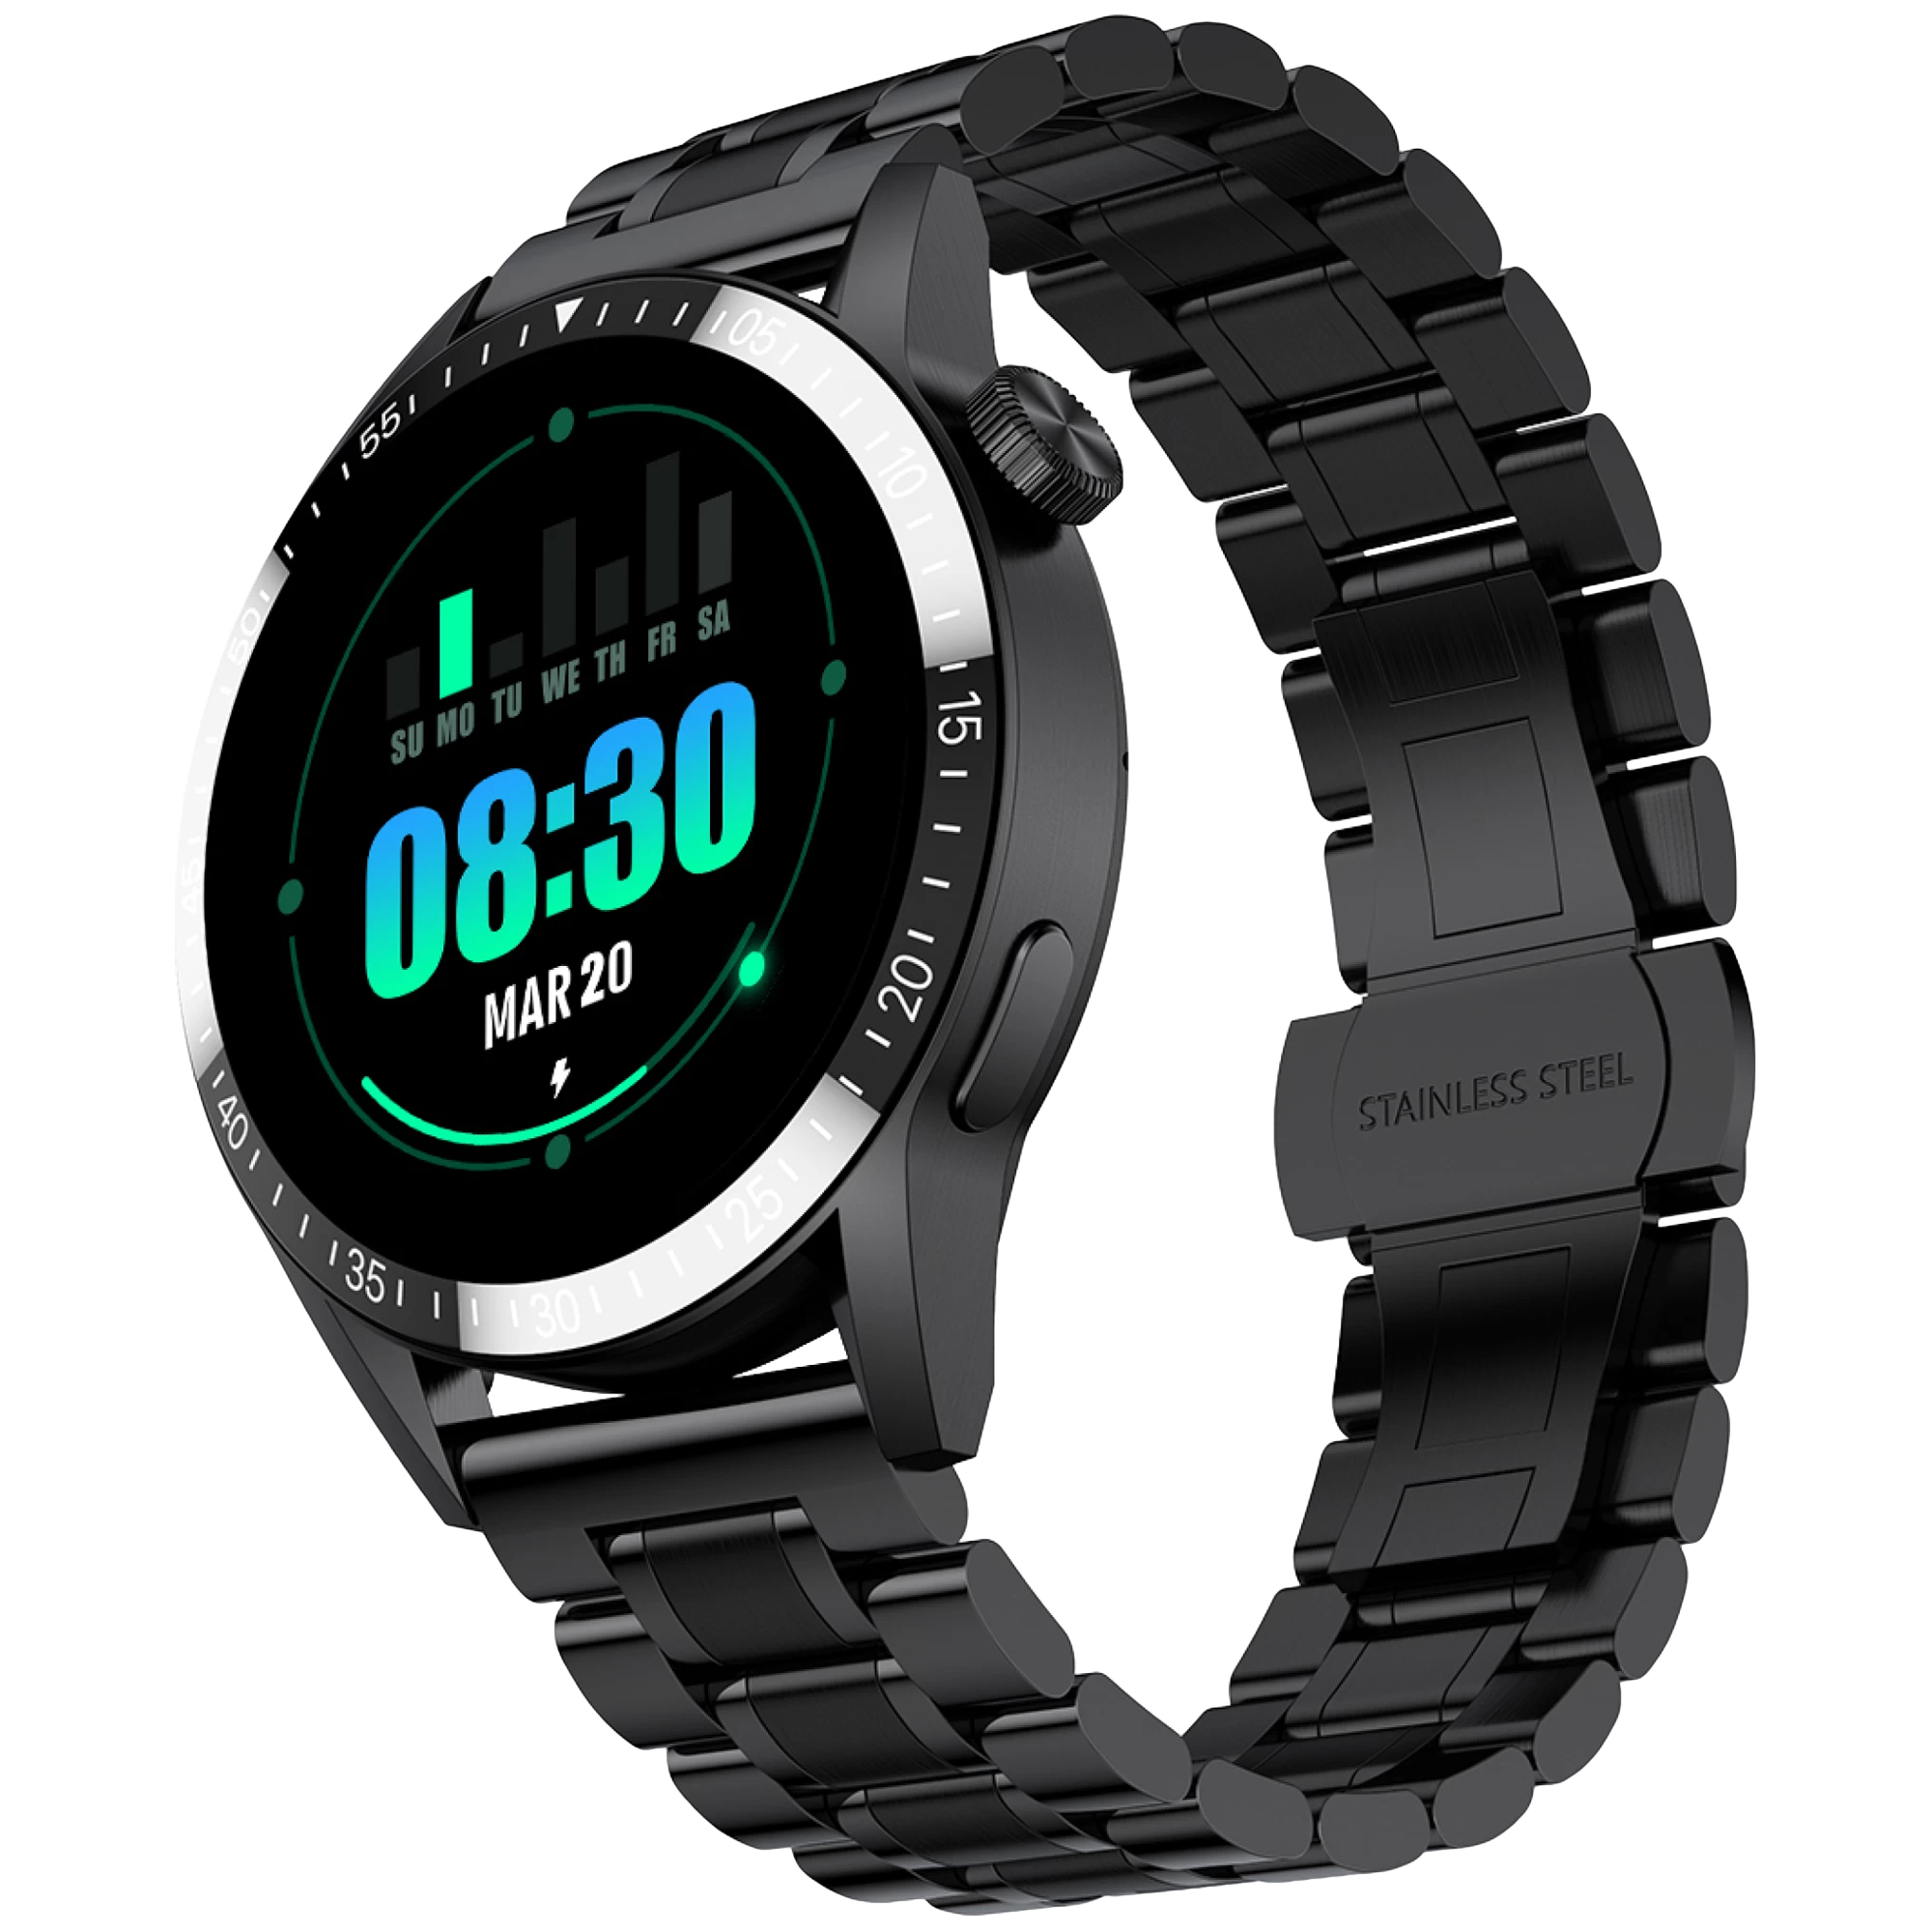 FIRE-BOLTT Ultimate Smartwatch with Bluetooth Calling (35.3mm LCD HD Display, IP68 Water Resistant, Black Strap)